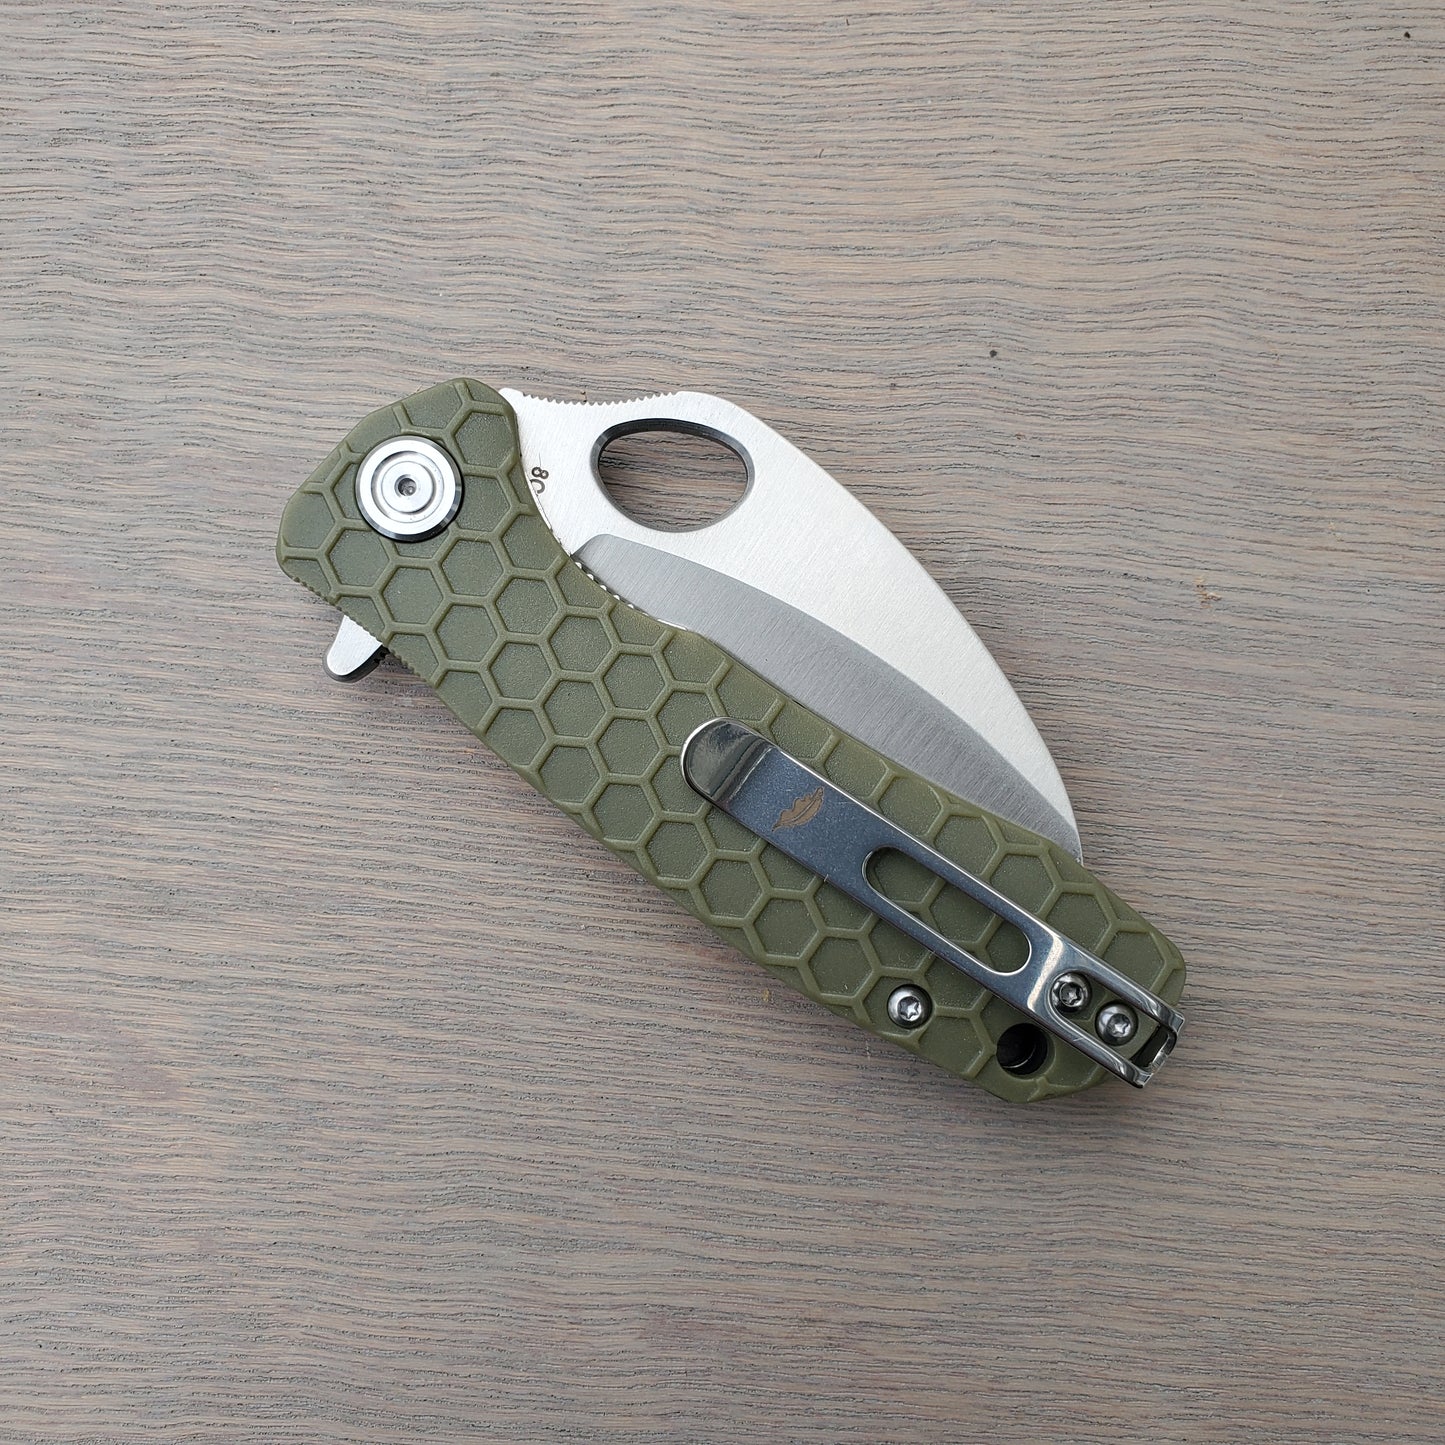 Honey Badger Small Claw - Serrated - Green